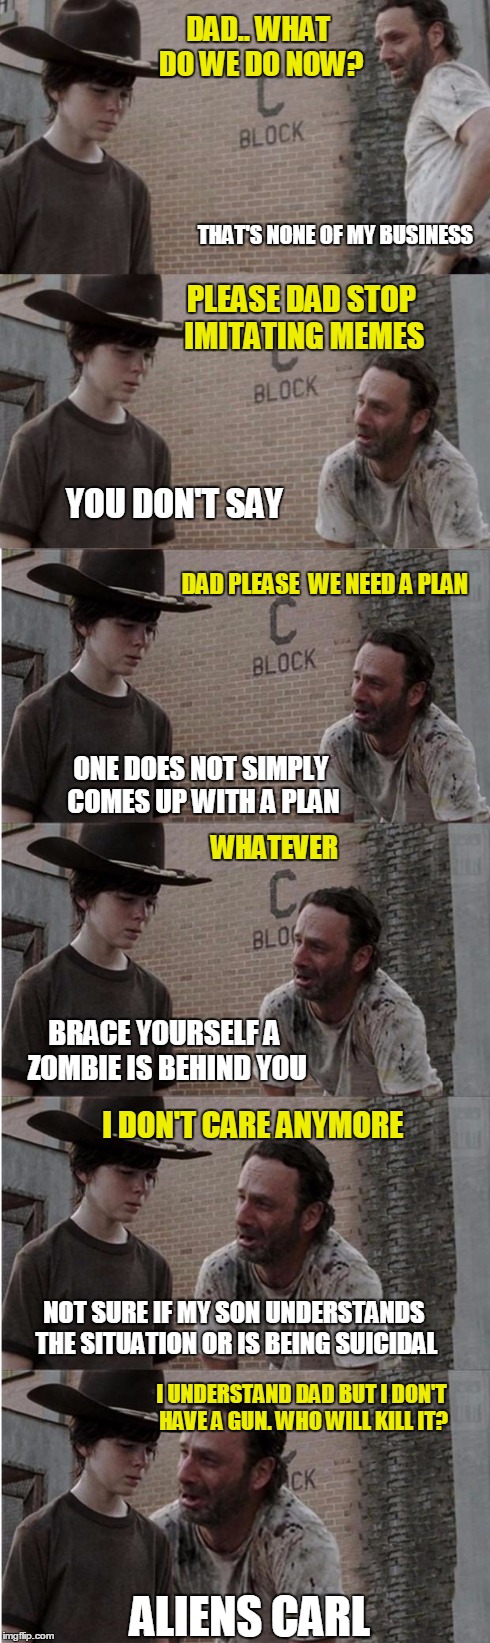 Rick and Carl Longer Meme | DAD.. WHAT DO WE DO NOW? DAD PLEASE  WE NEED A PLAN THAT'S NONE OF MY BUSINESS PLEASE DAD STOP IMITATING MEMES YOU DON'T SAY ONE DOES NOT SI | image tagged in memes,rick and carl longer | made w/ Imgflip meme maker